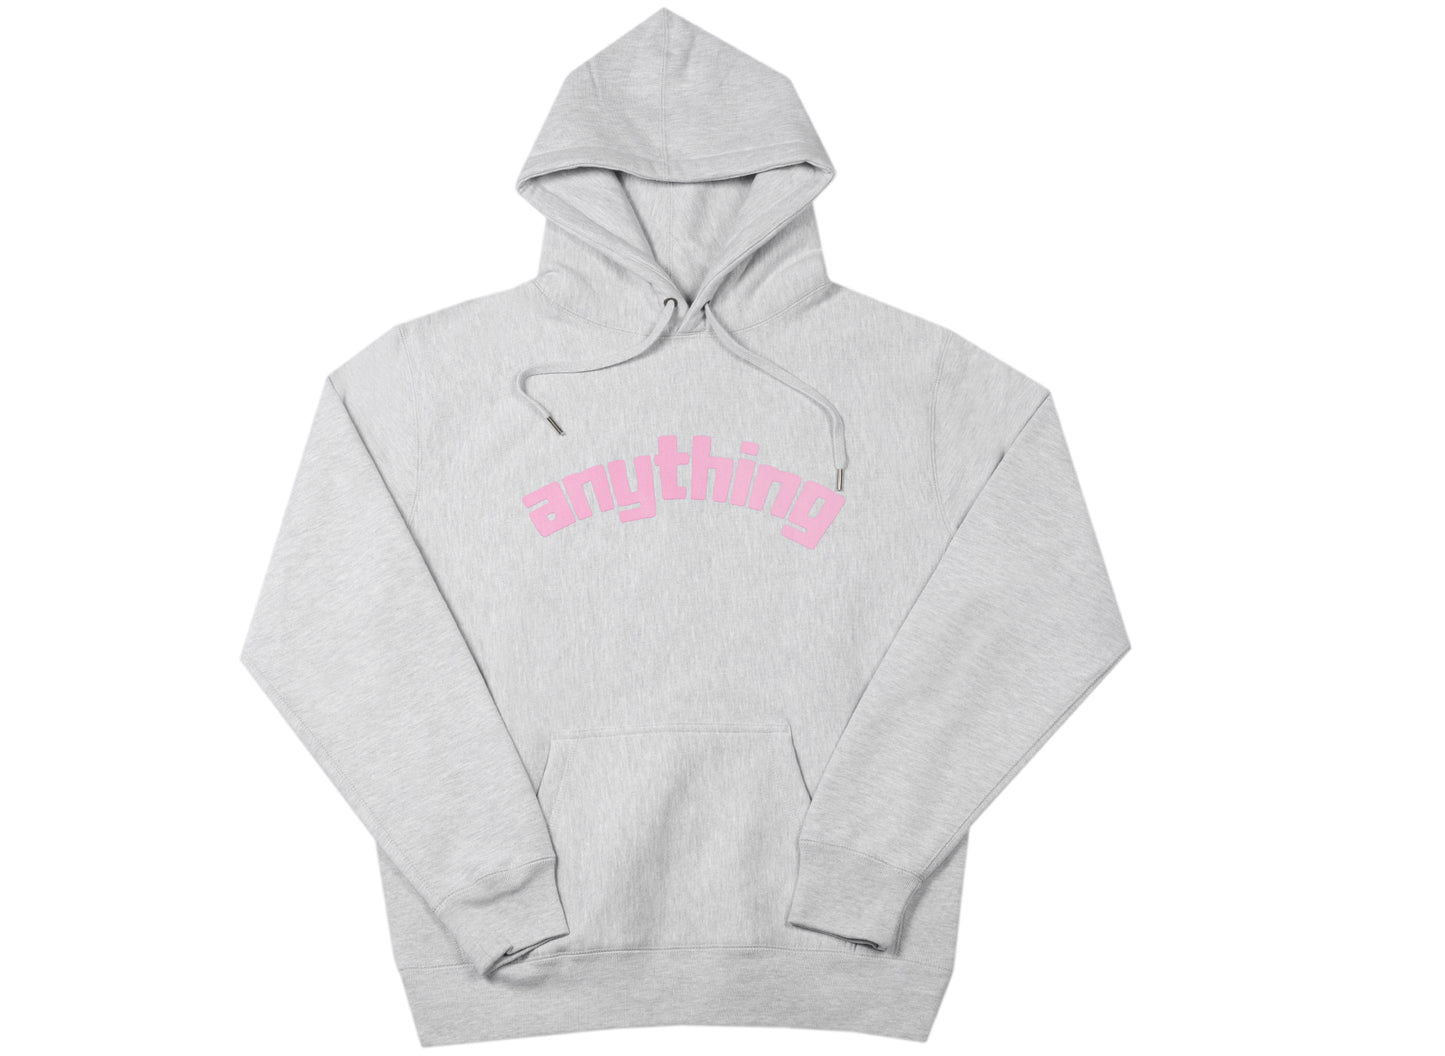 aNYthing Arch Logo Hoodie